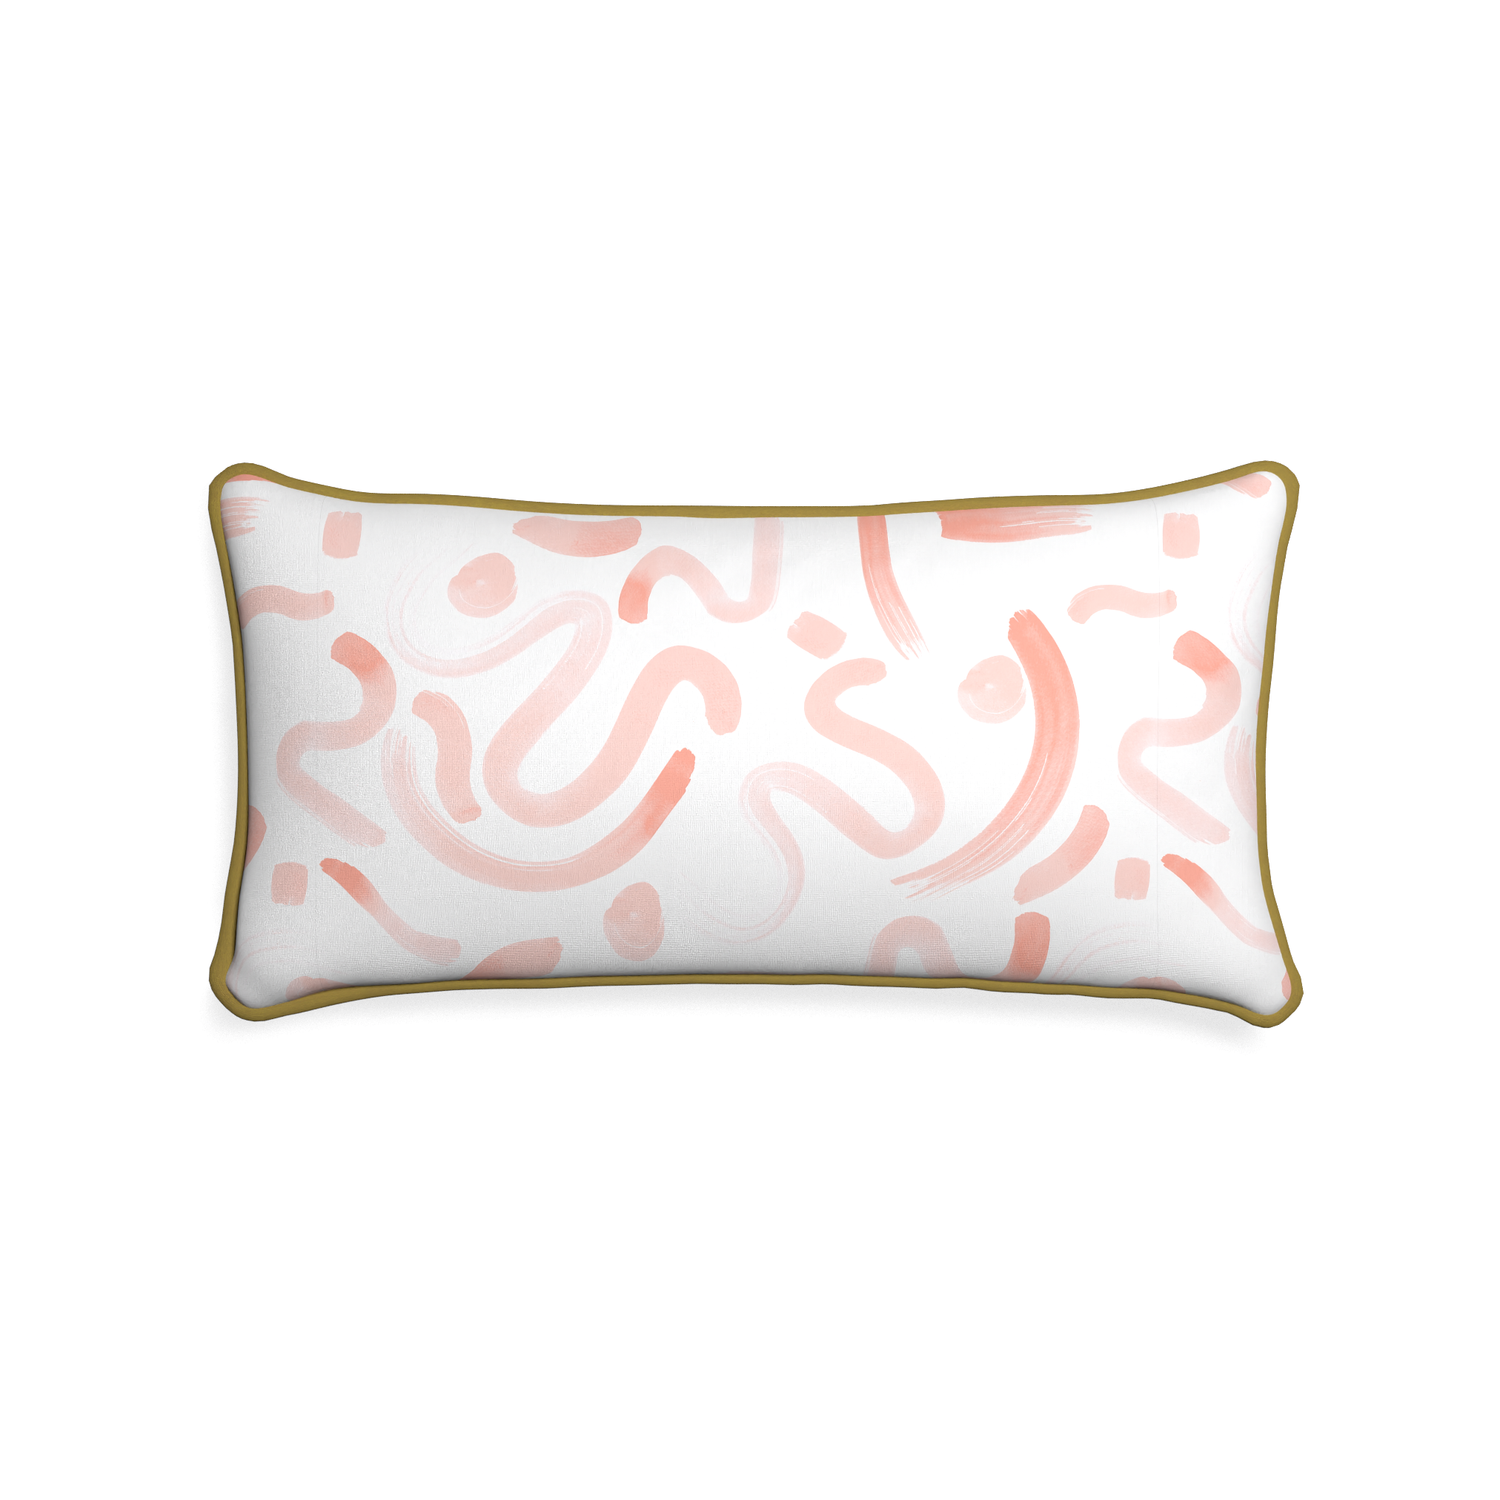 Midi-lumbar hockney pink custom pink graphicpillow with c piping on white background